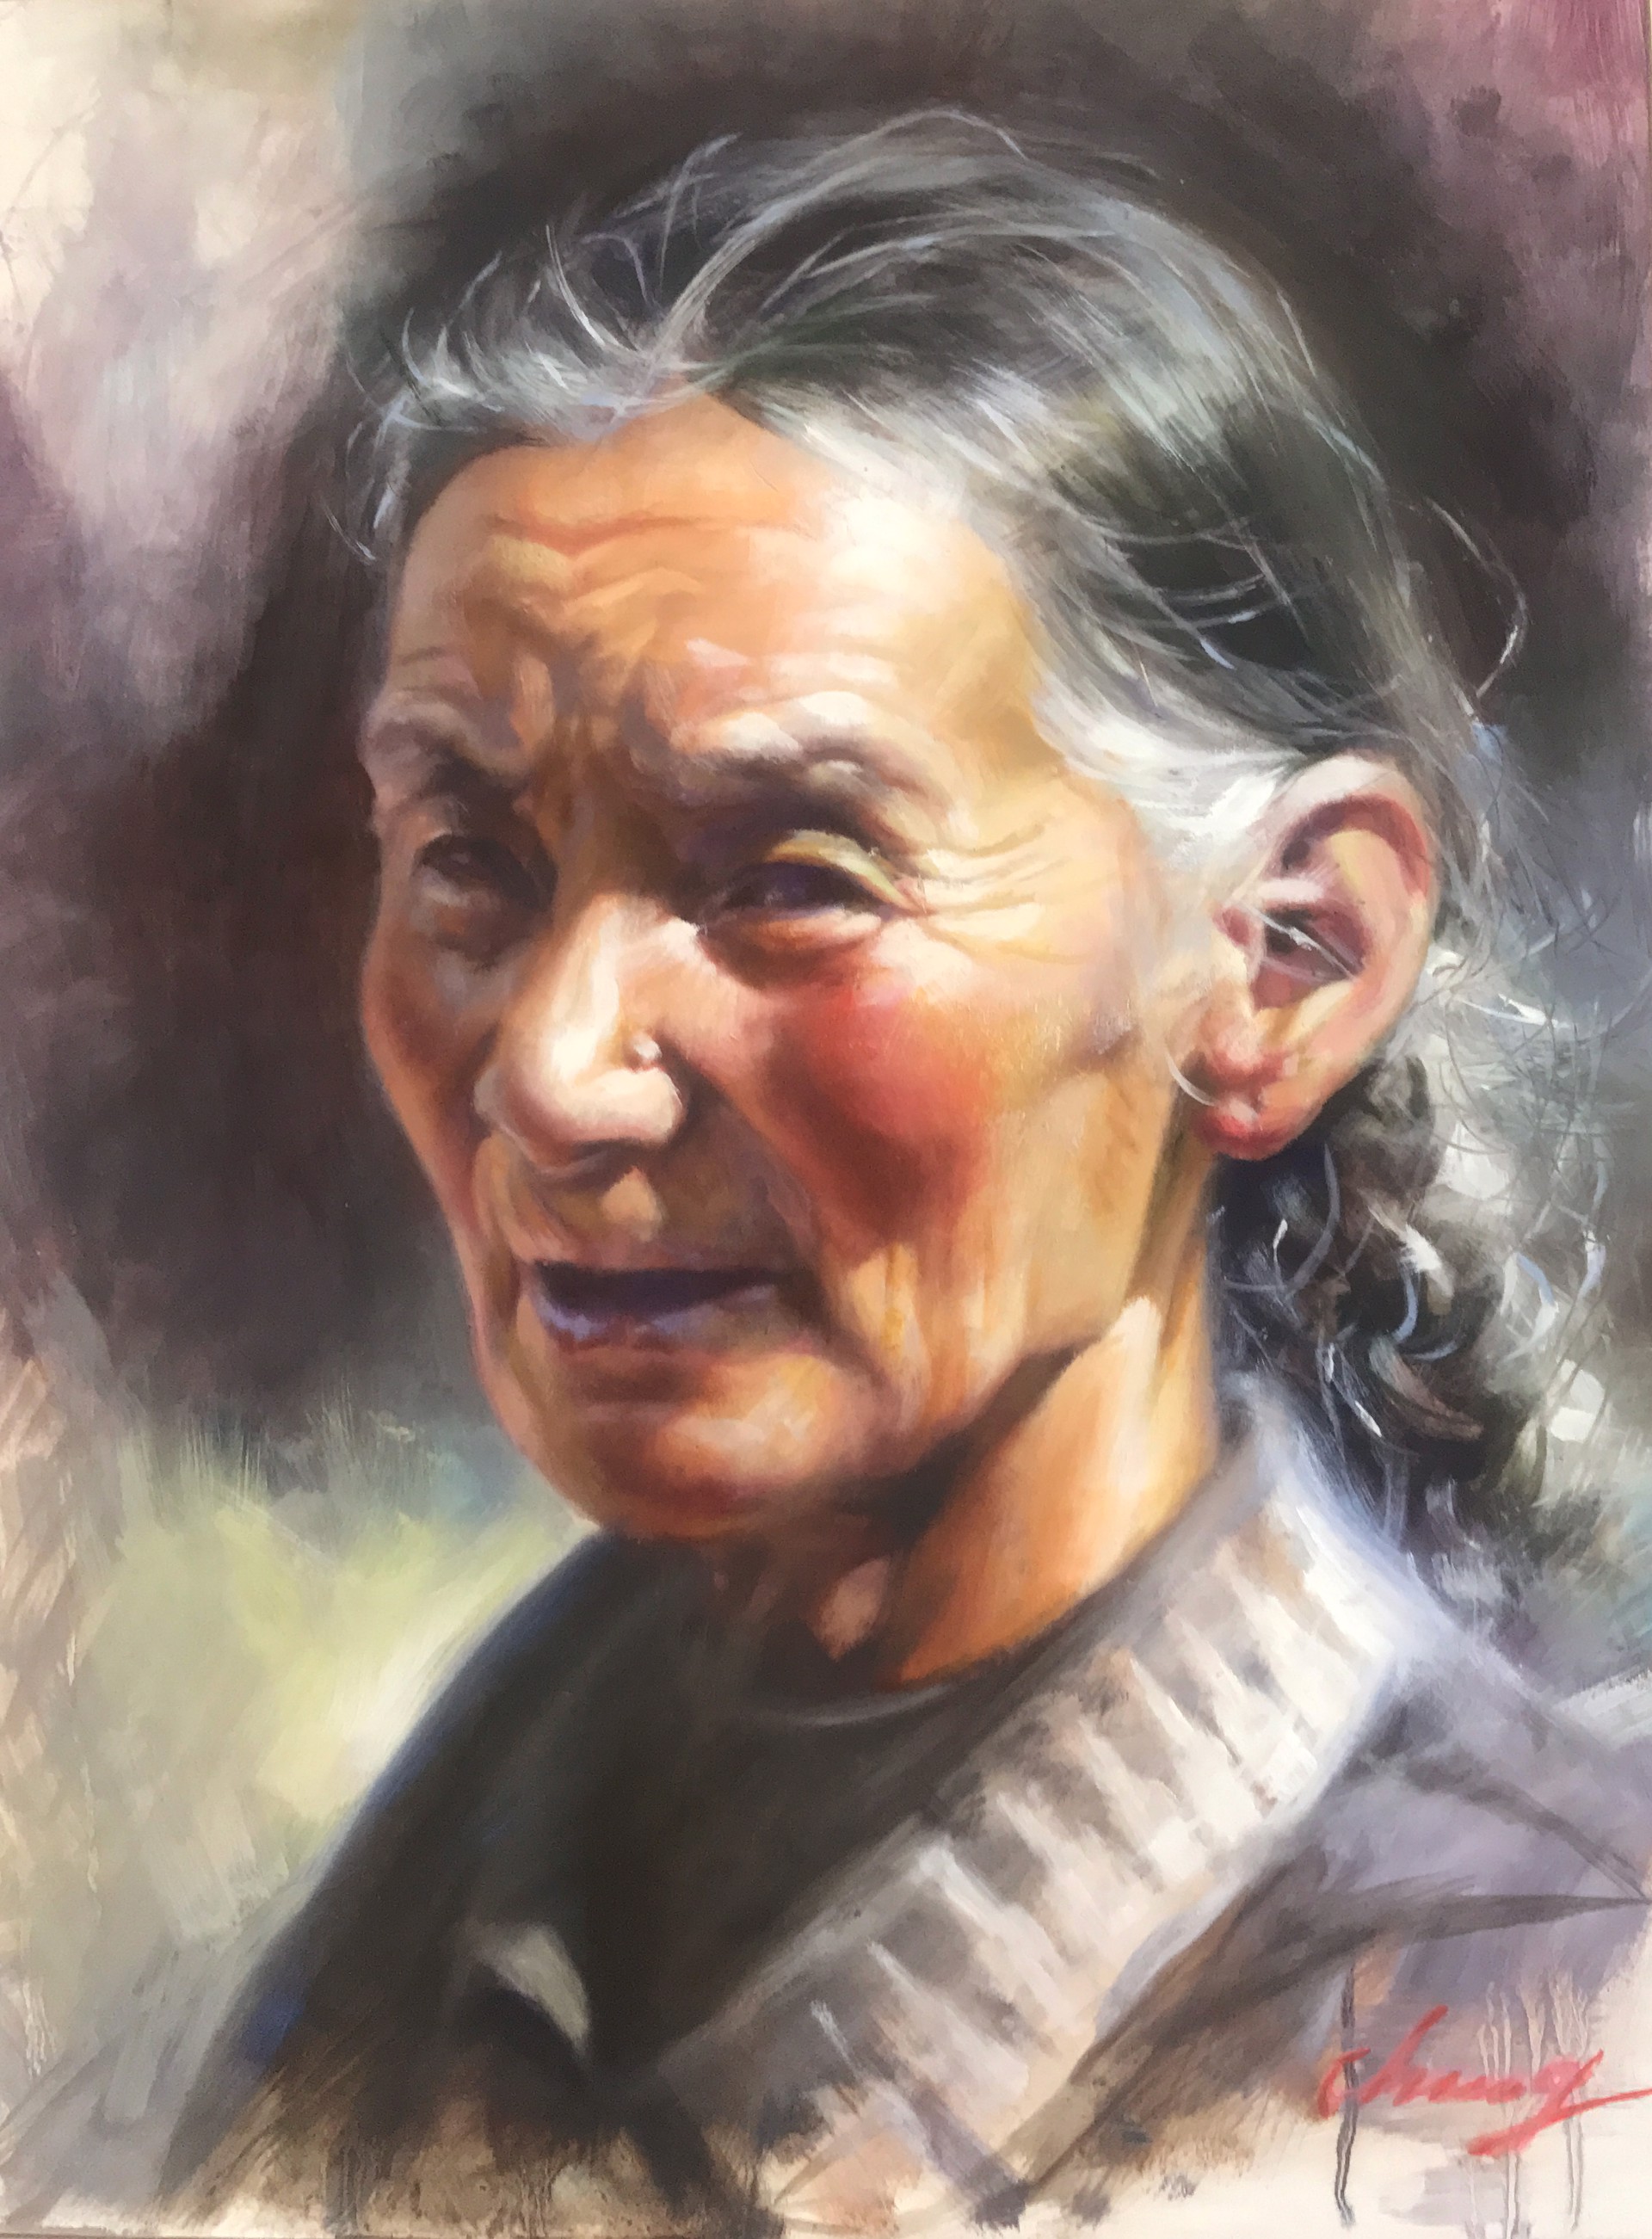 Braided Aging - AWARD WINNER - AWARD OF EXCELLENCE by Chunming Jia